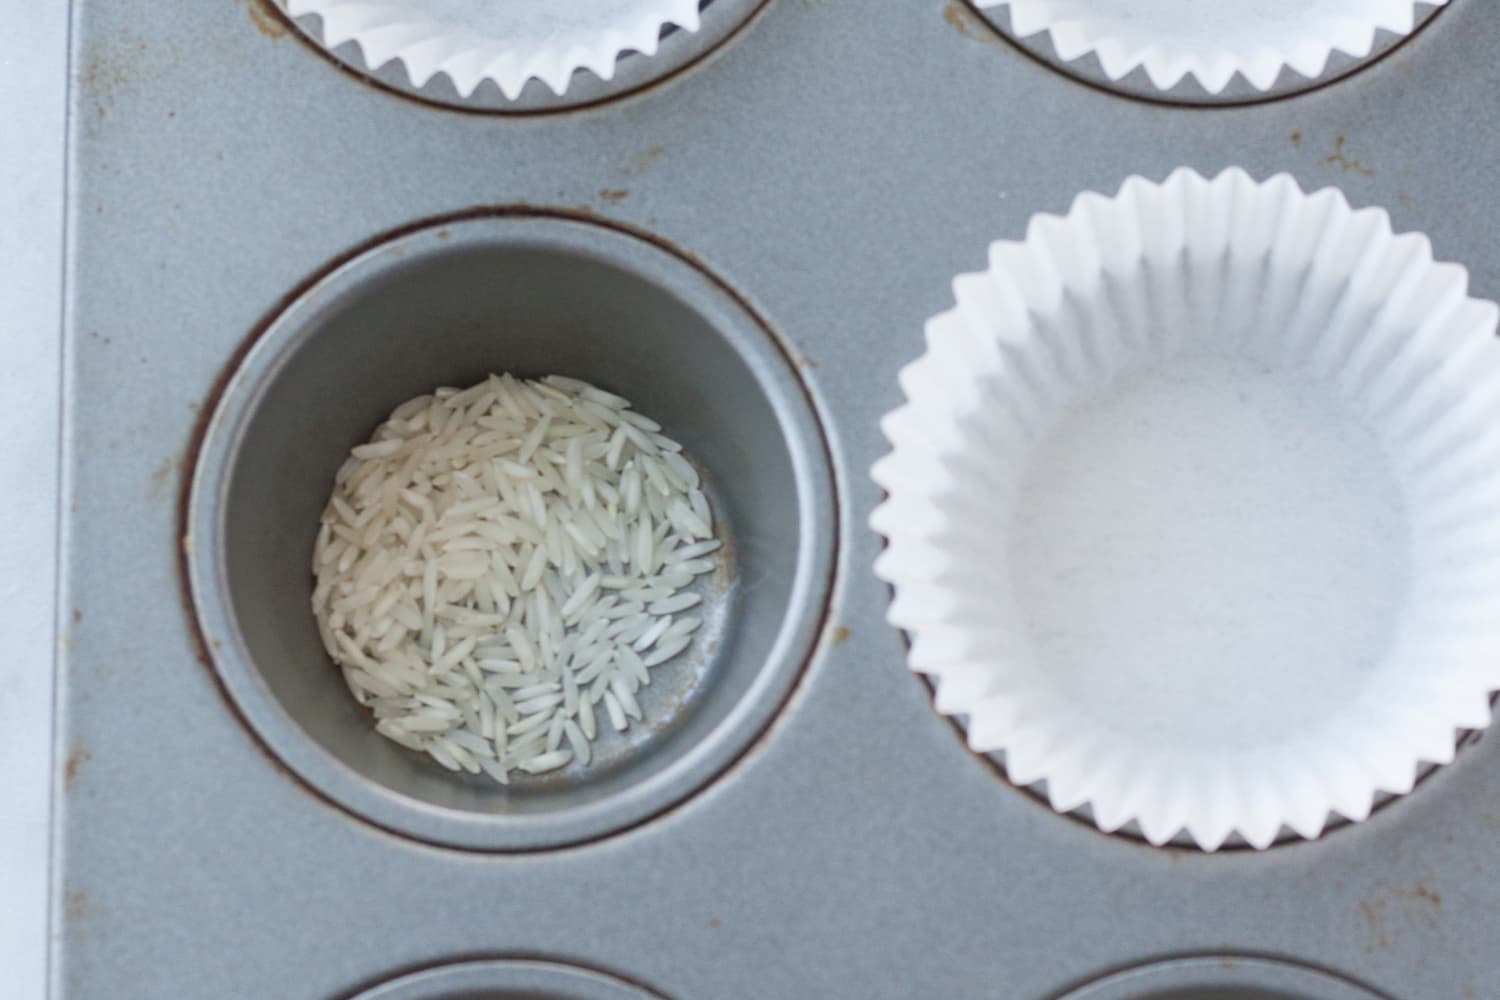 Try This Cupcake and Muffin Rice Baking Hack for Grease-Free Bottoms